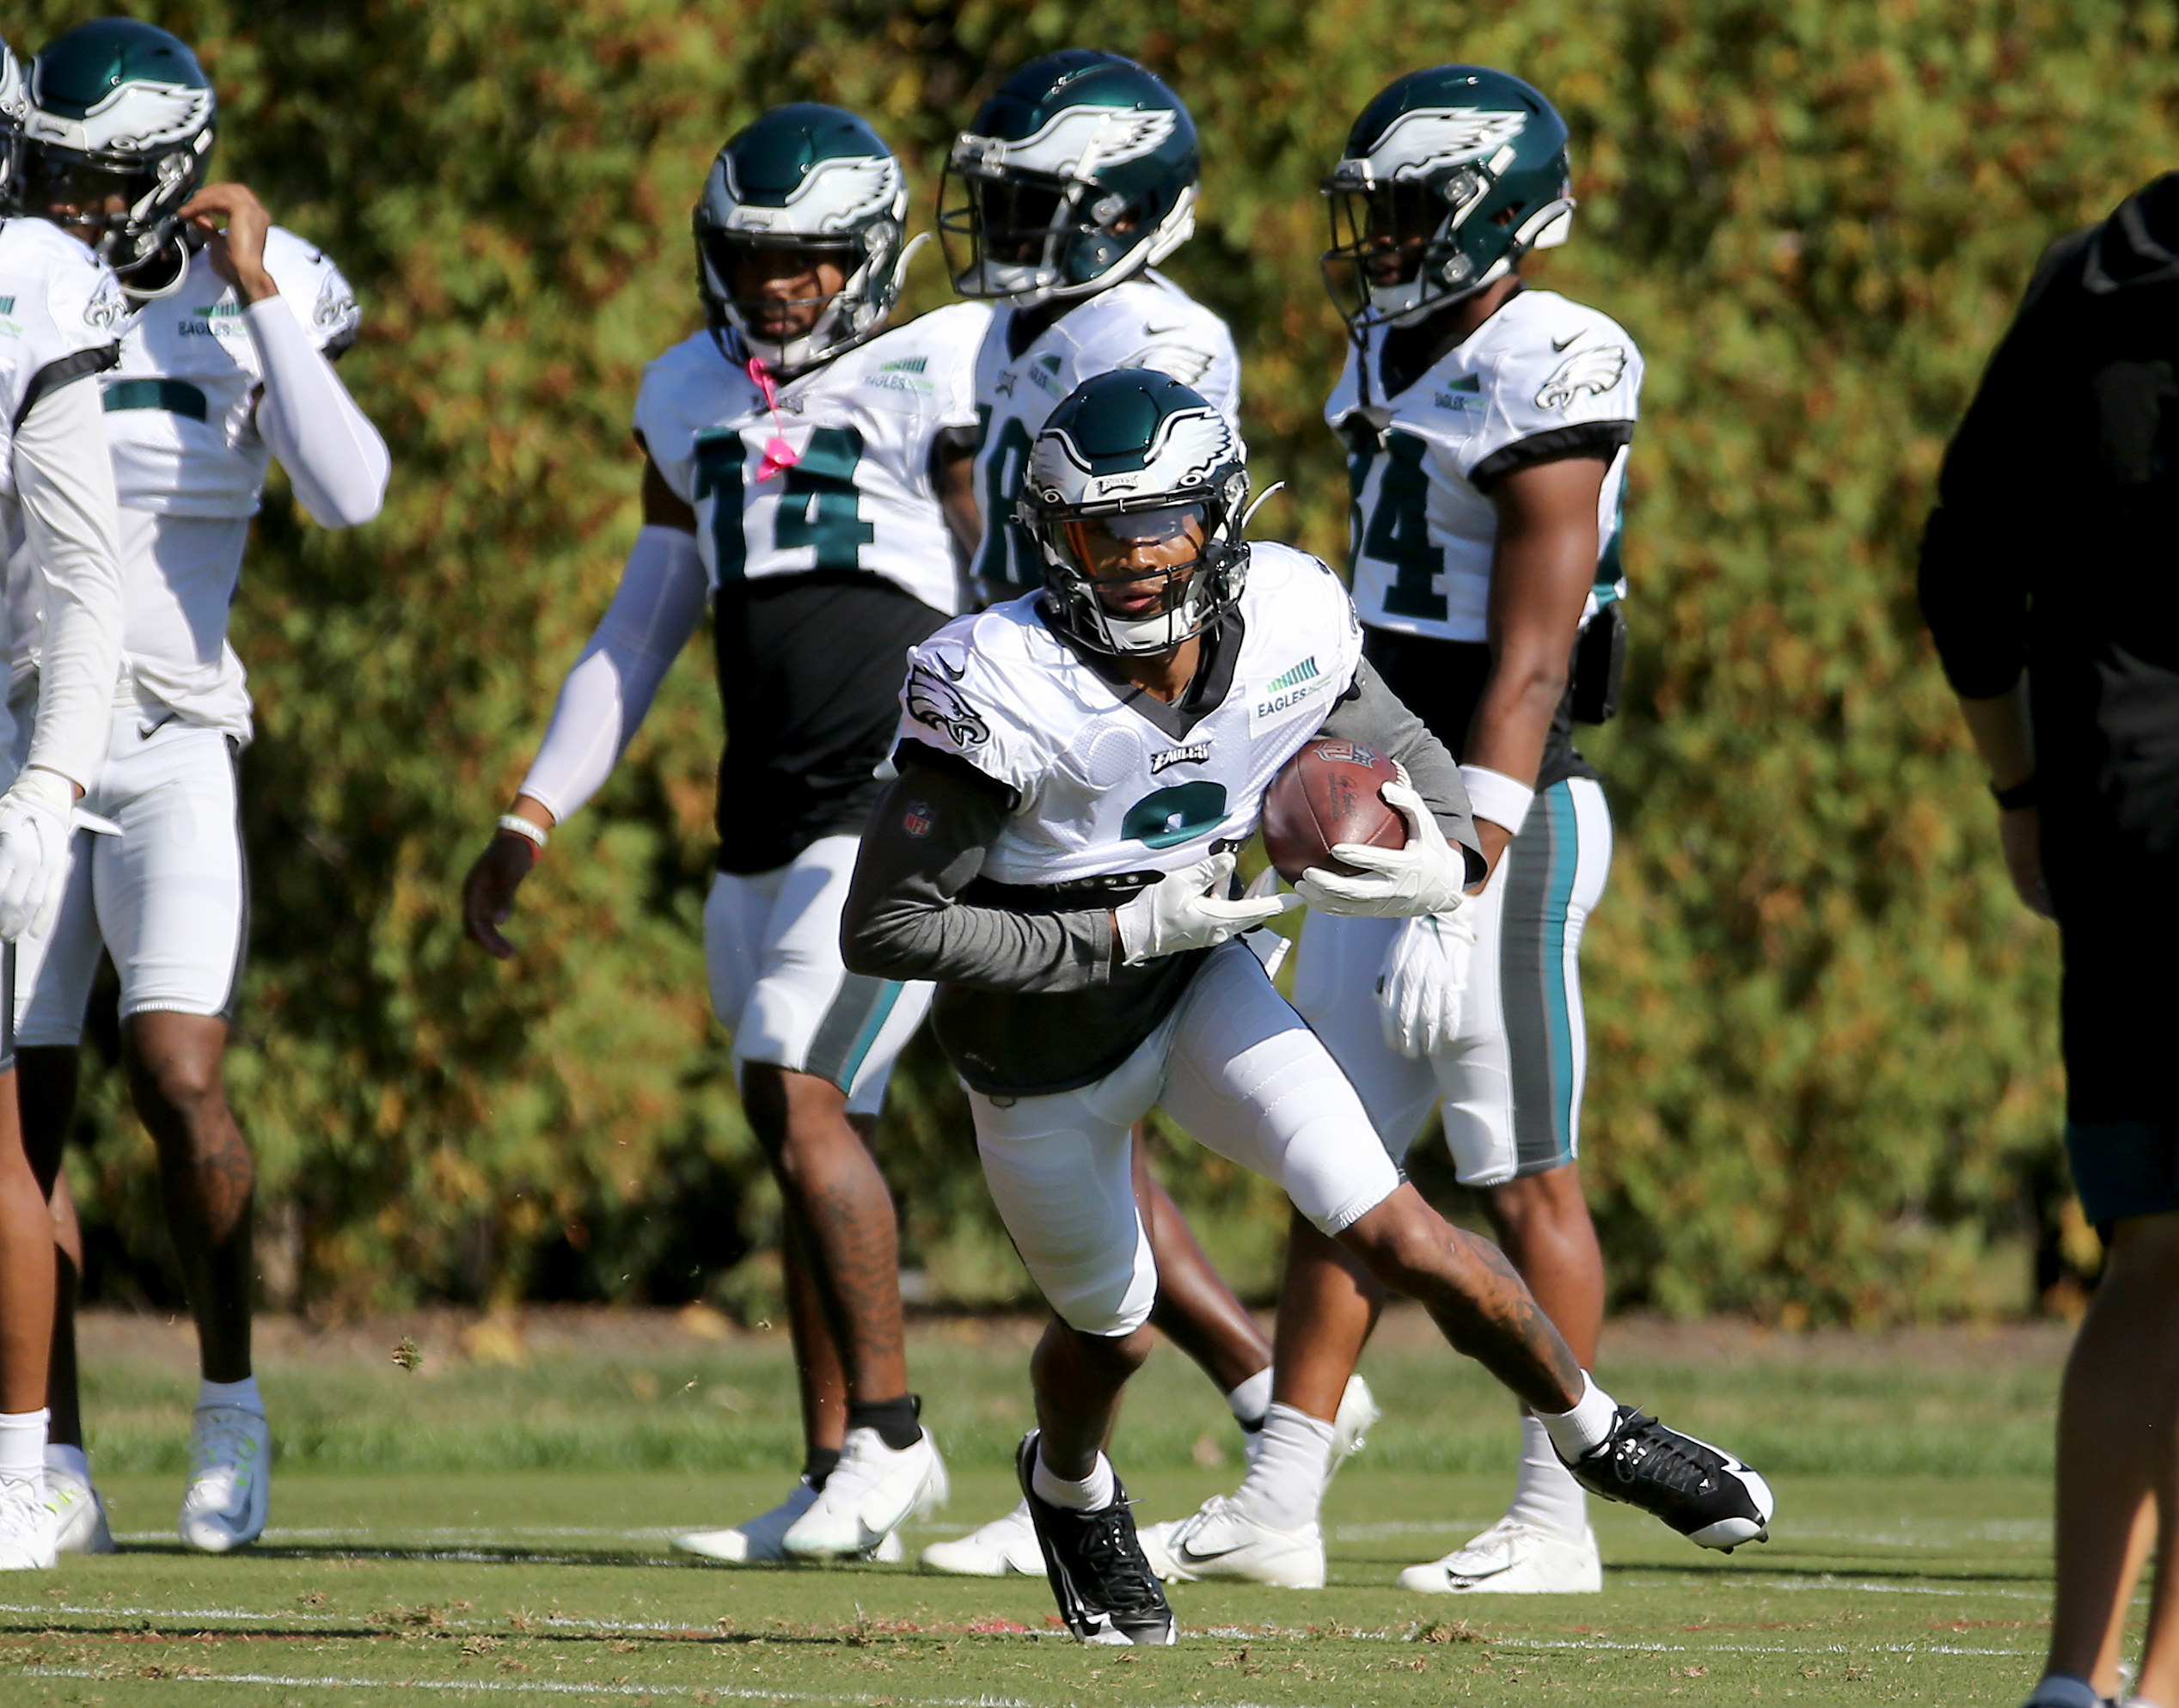 Philadelphia Eagles rookie WR DeVonta Smith plays with 'bigger purpose'  after events involving former teammate Henry Ruggs III - 6abc Philadelphia